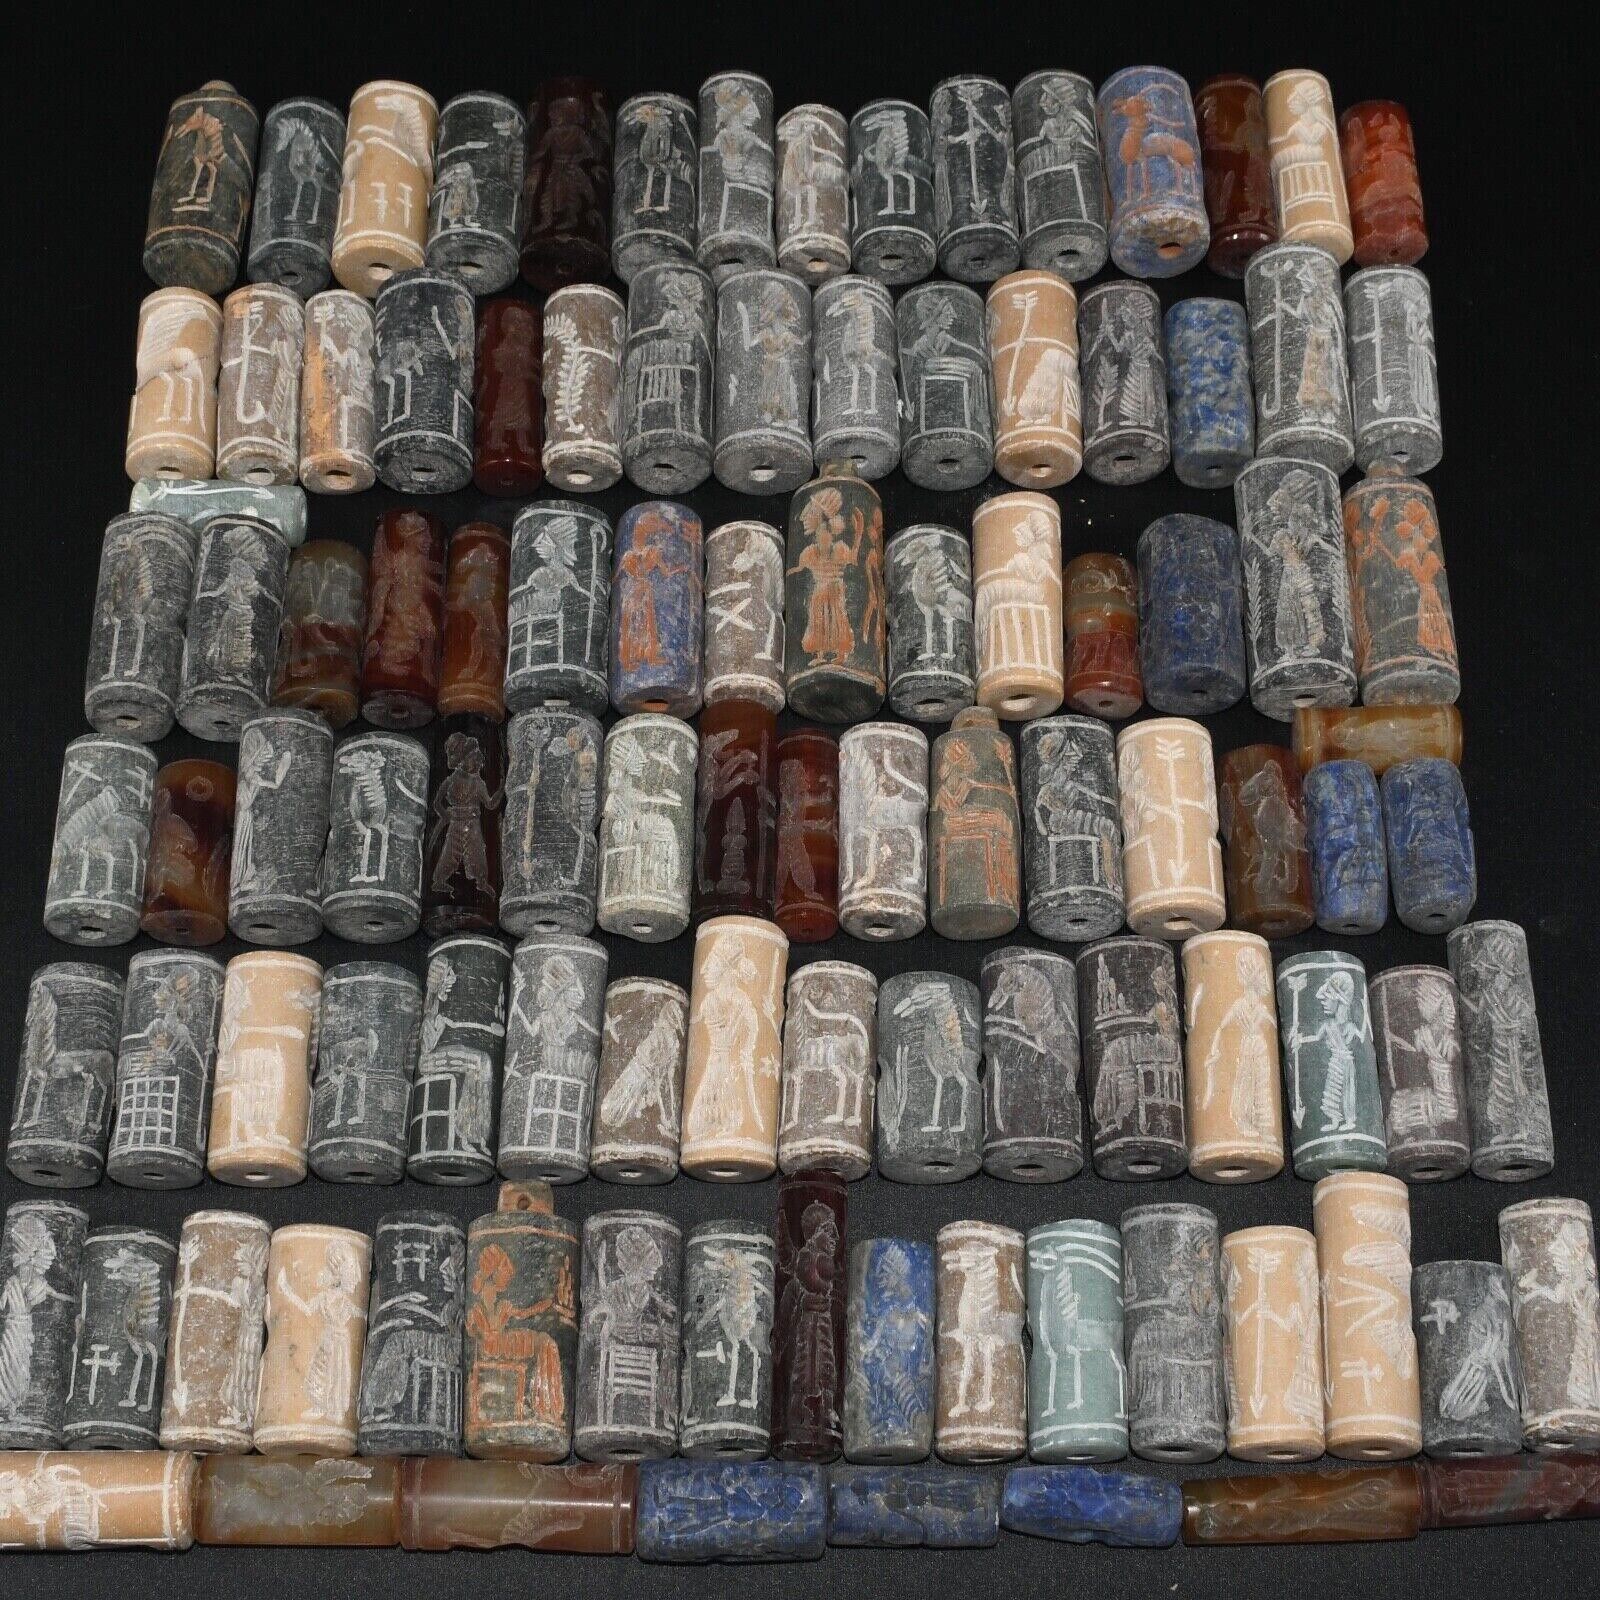 104 Ancient Middle Eastern Mix Stone Cylinder Seal Bead Amulets C. 2300-3000 BCE